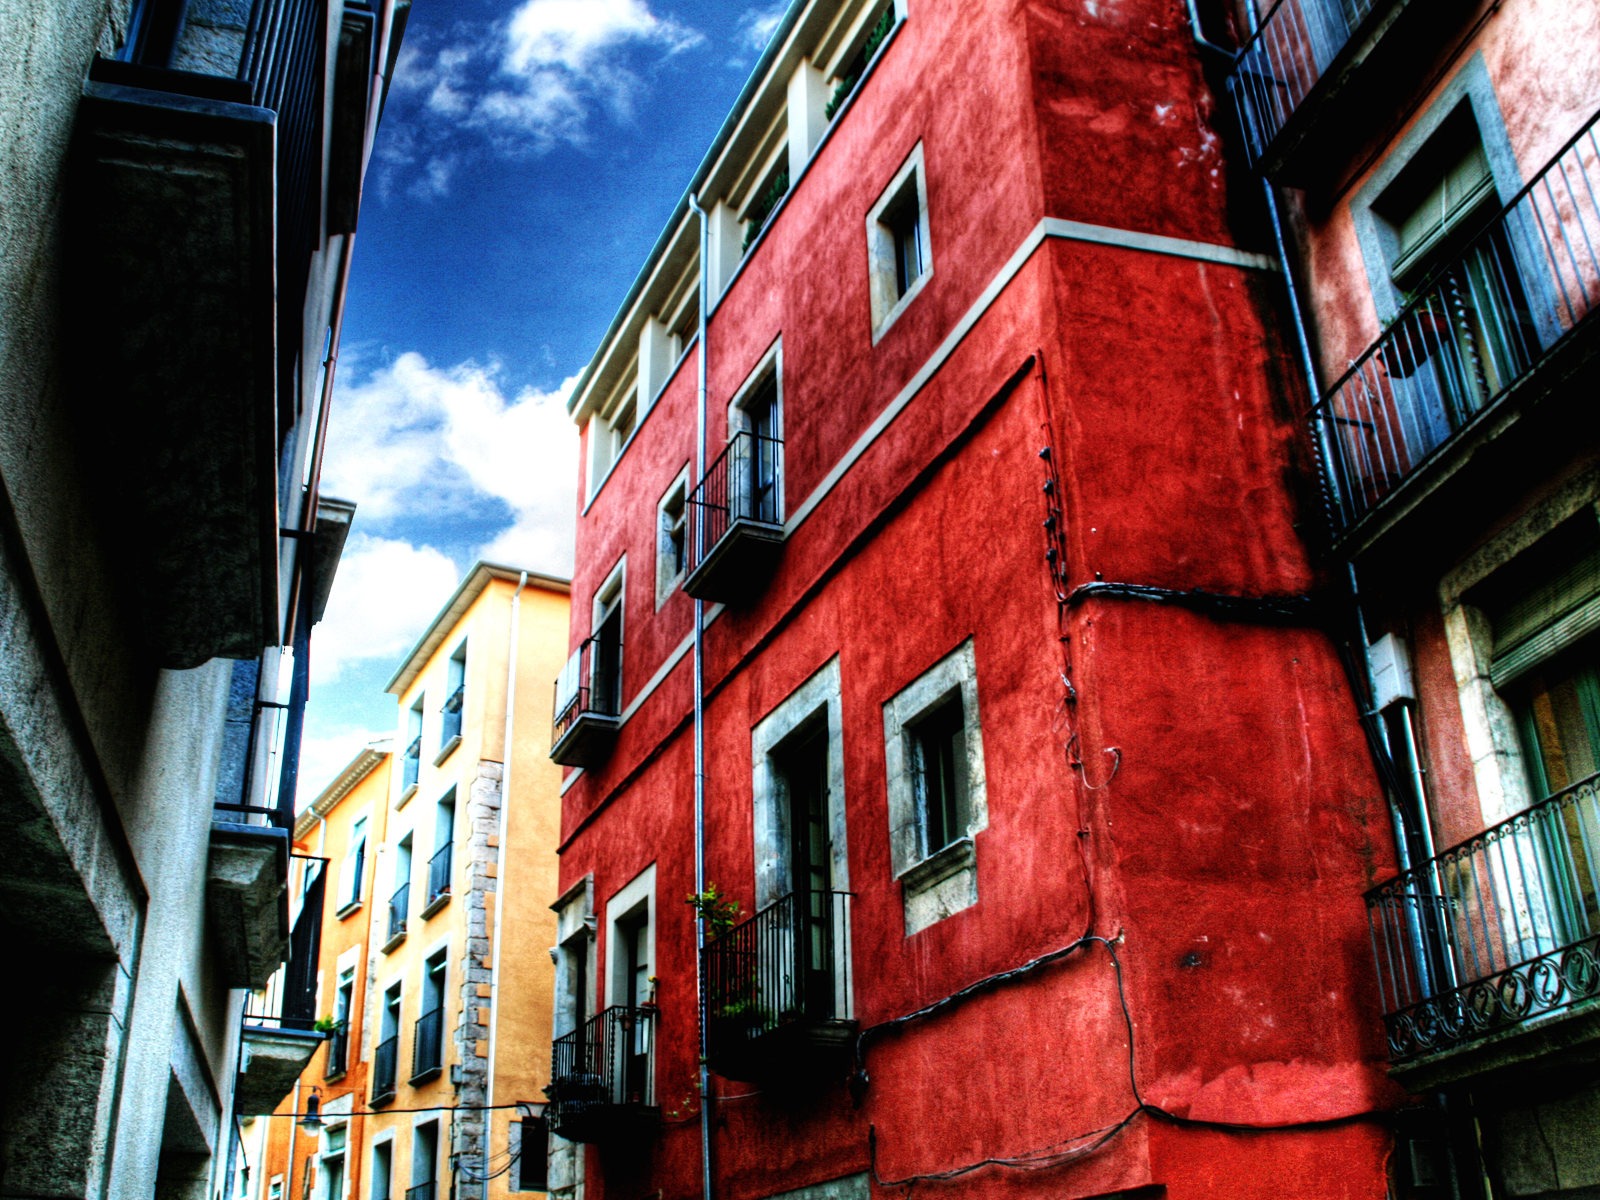 Spain Girona HDR-style wallpapers #4 - 1600x1200